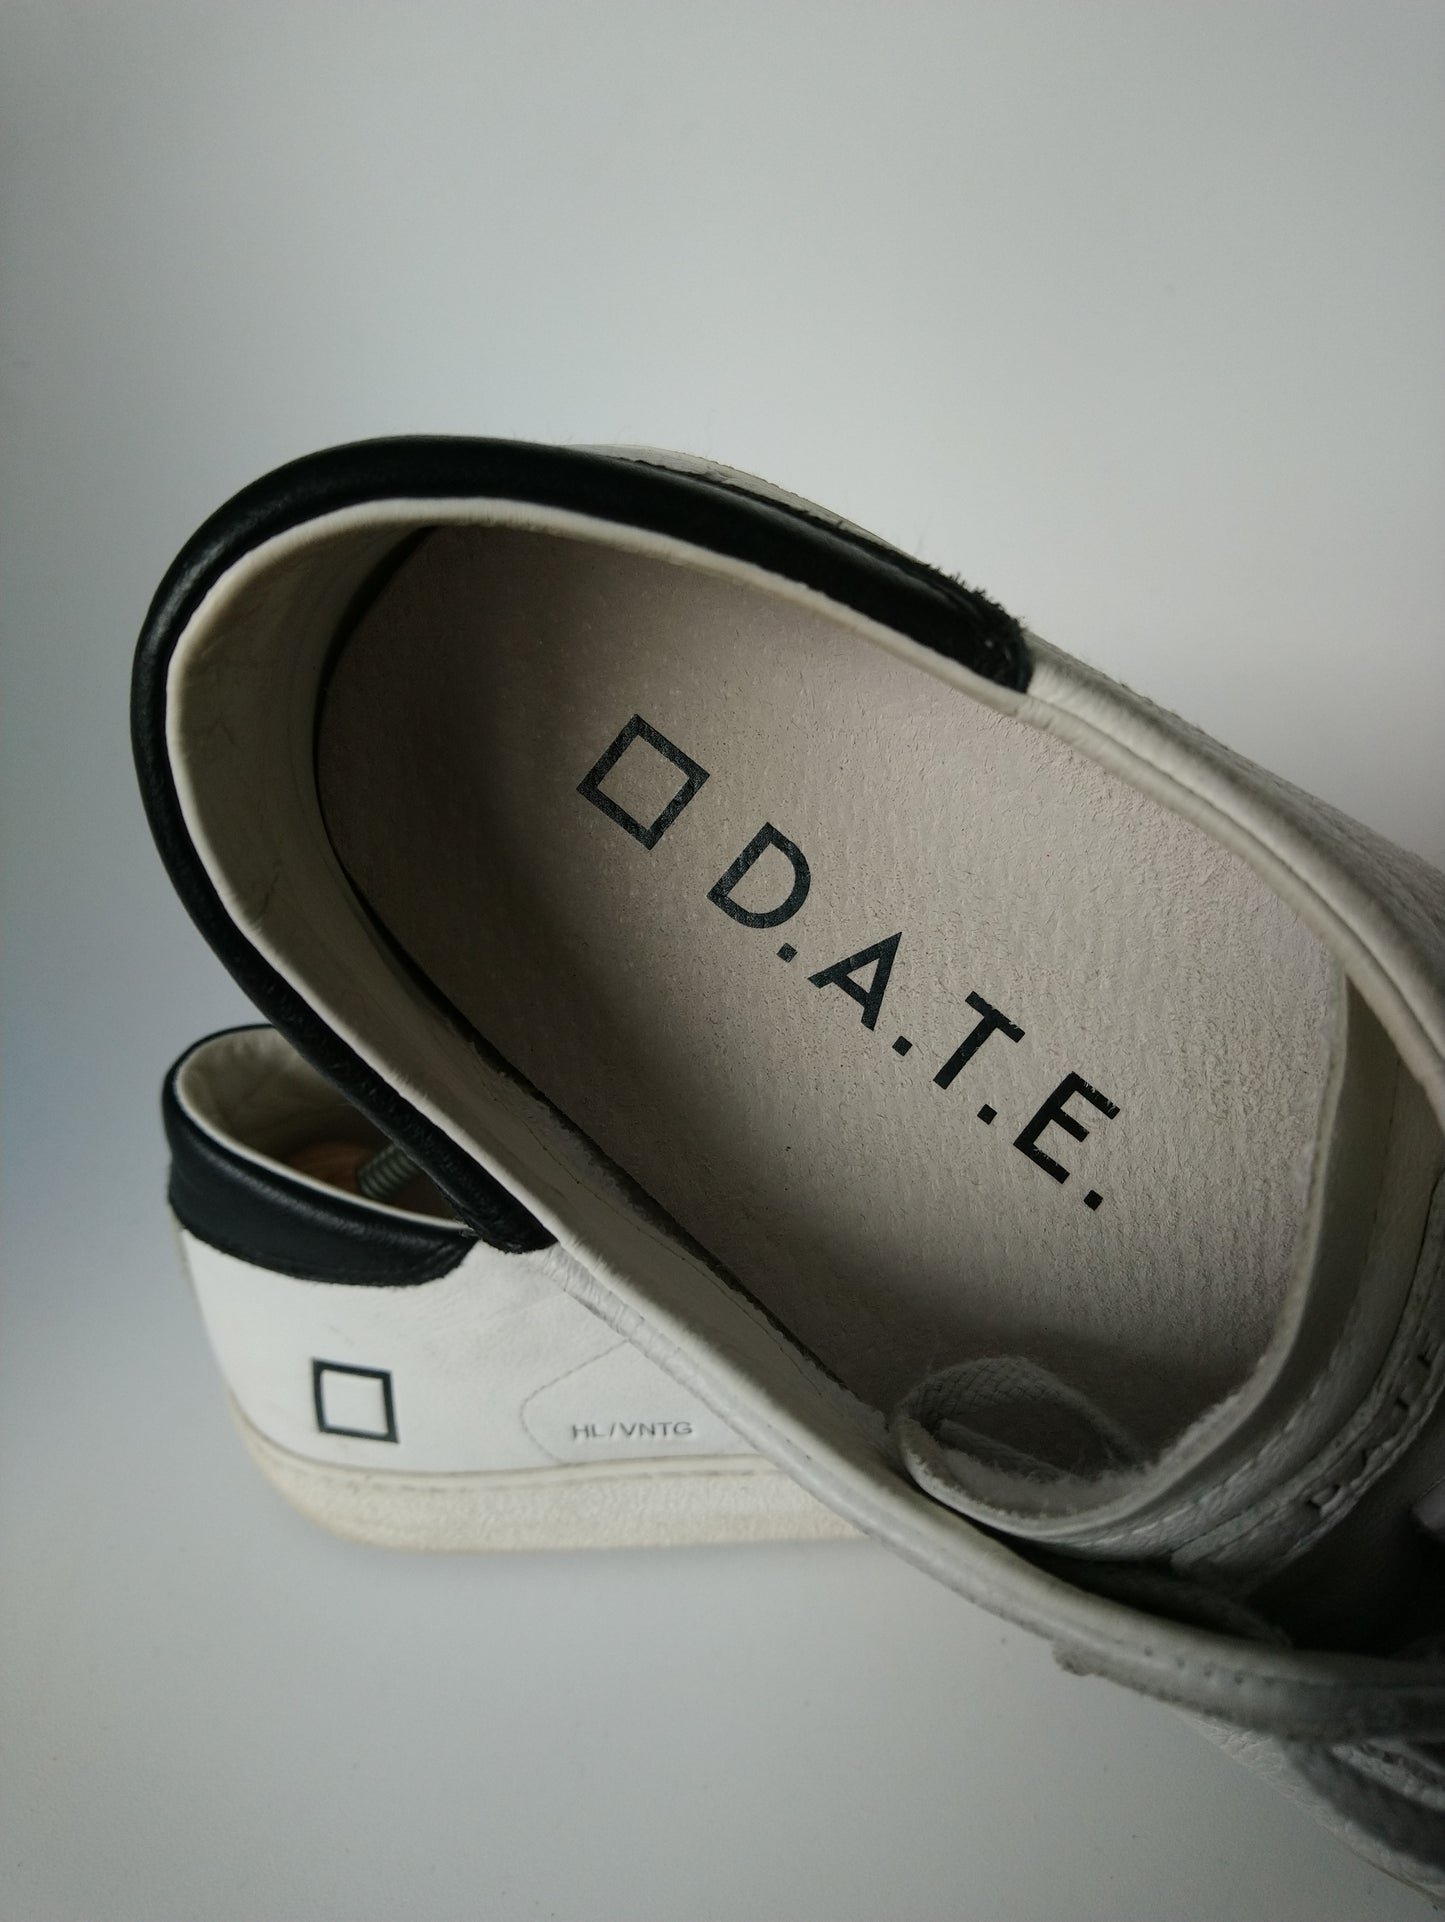 D.A.T.E. Leather sneakers. White. Size 44.